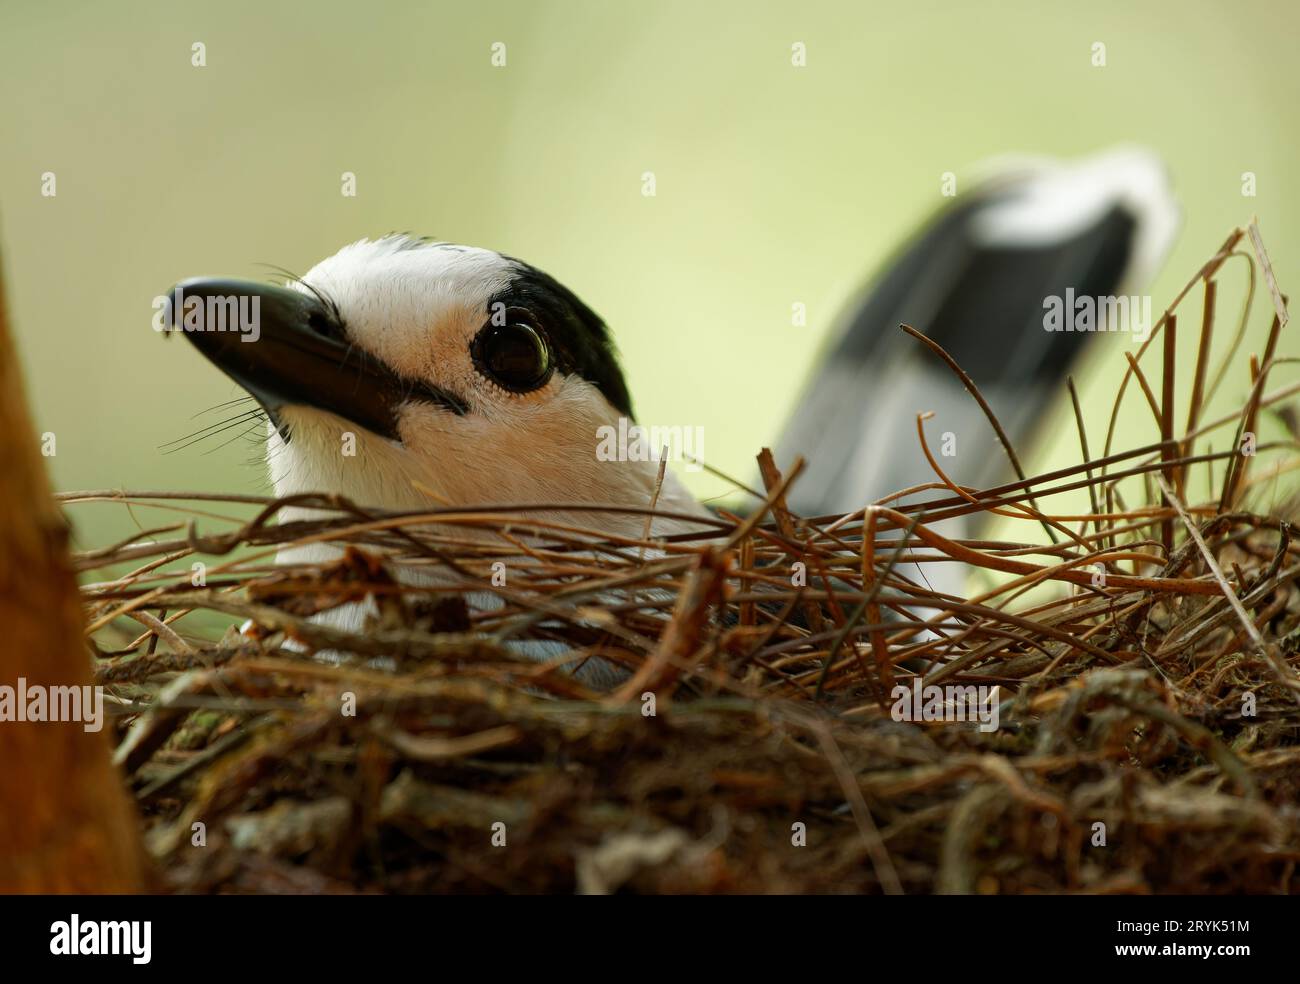 Hook-billed vanga Vanga curvirostris sits on the nest in the tree, black and white bird in Vangidae endemic to Madagascar in subtropical or tropical d Stock Photo